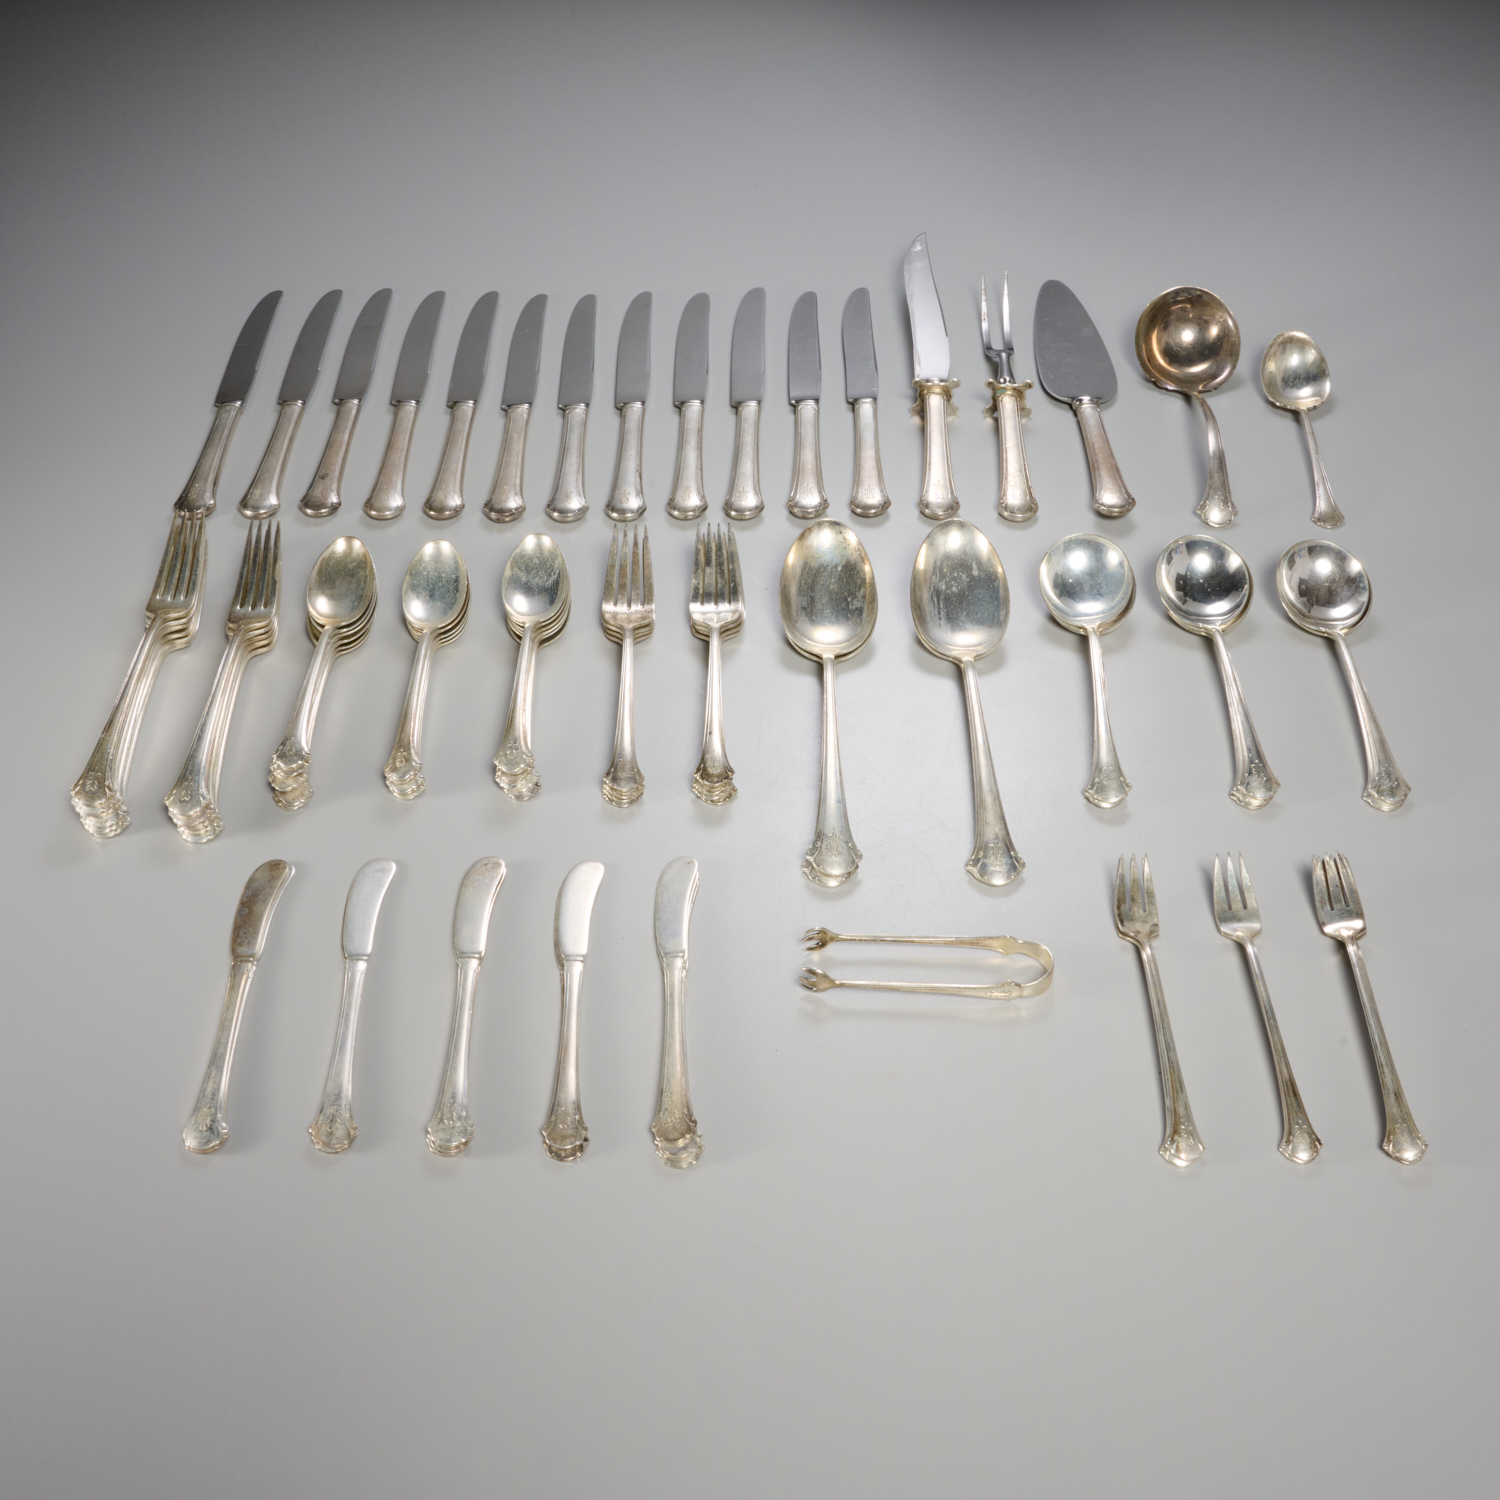 TOWLE 'CHIPPENDALE' STERLING FLATWARE